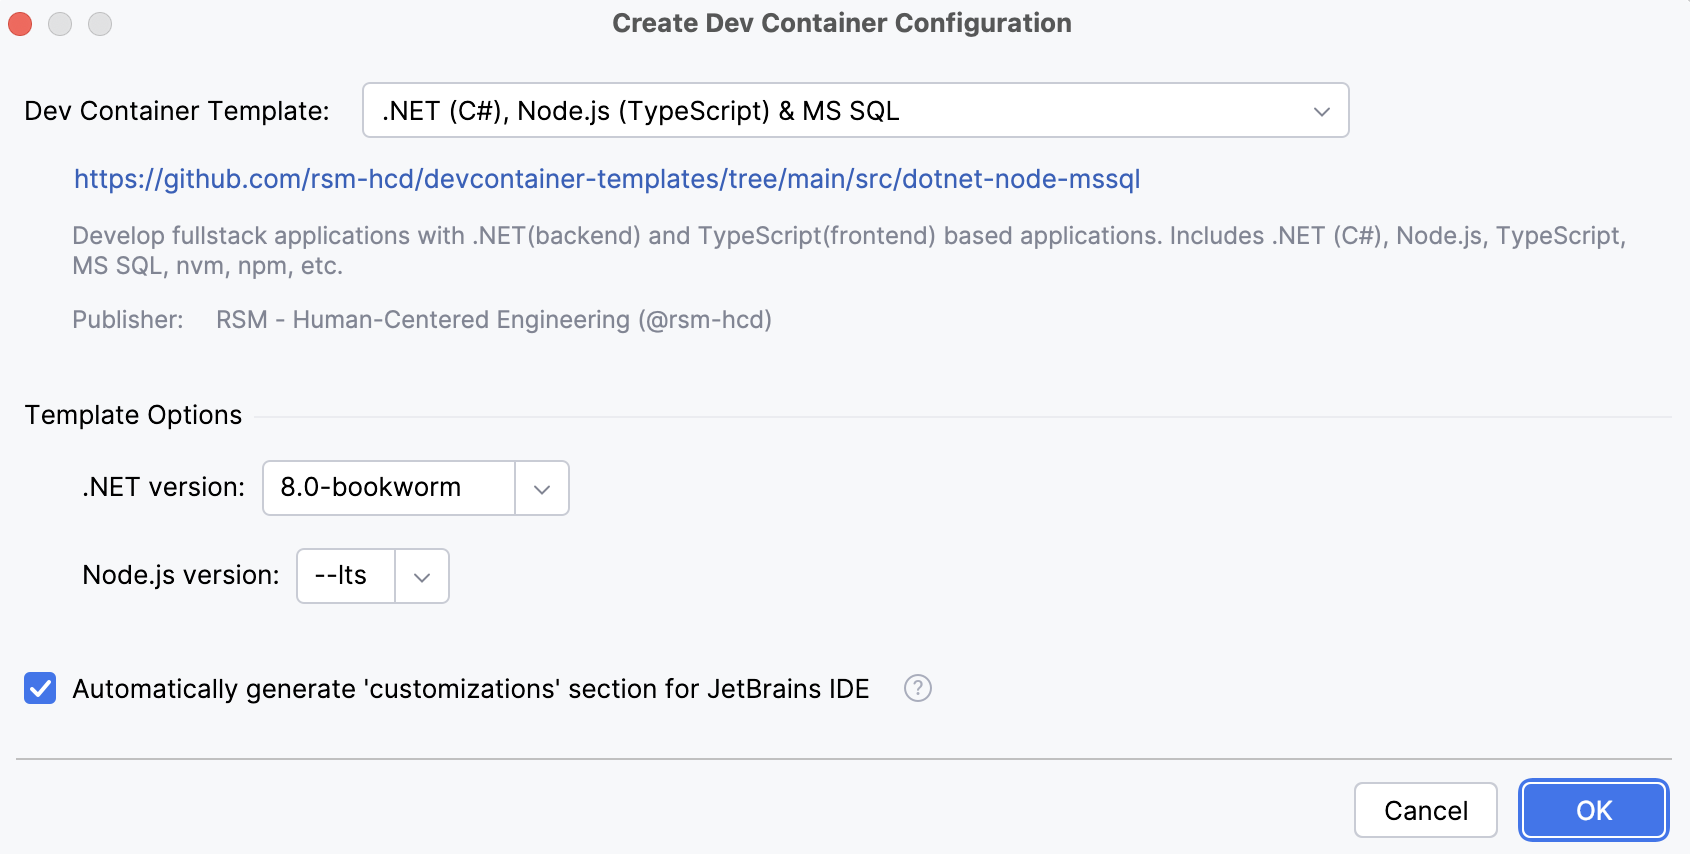 Create new dev container